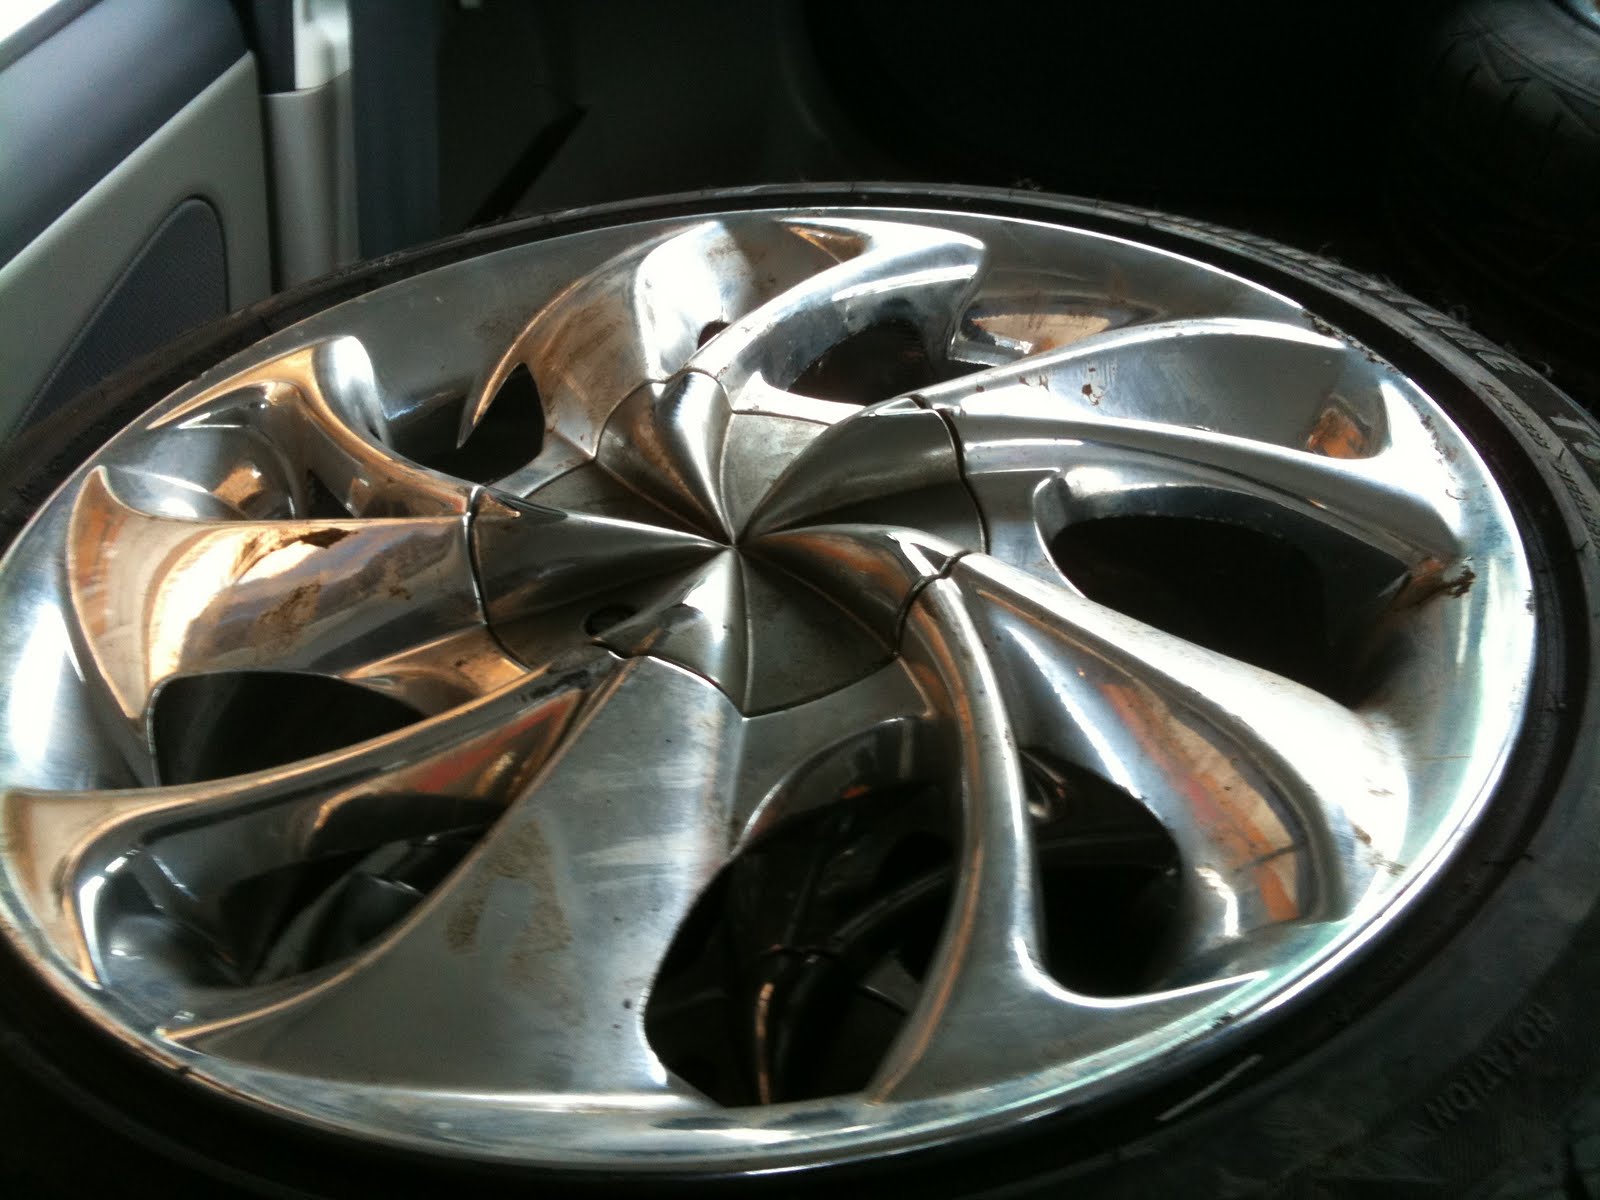 For Kcar Lover And Autoshow: Rim Chrome 16 inci PCD 100/114.3